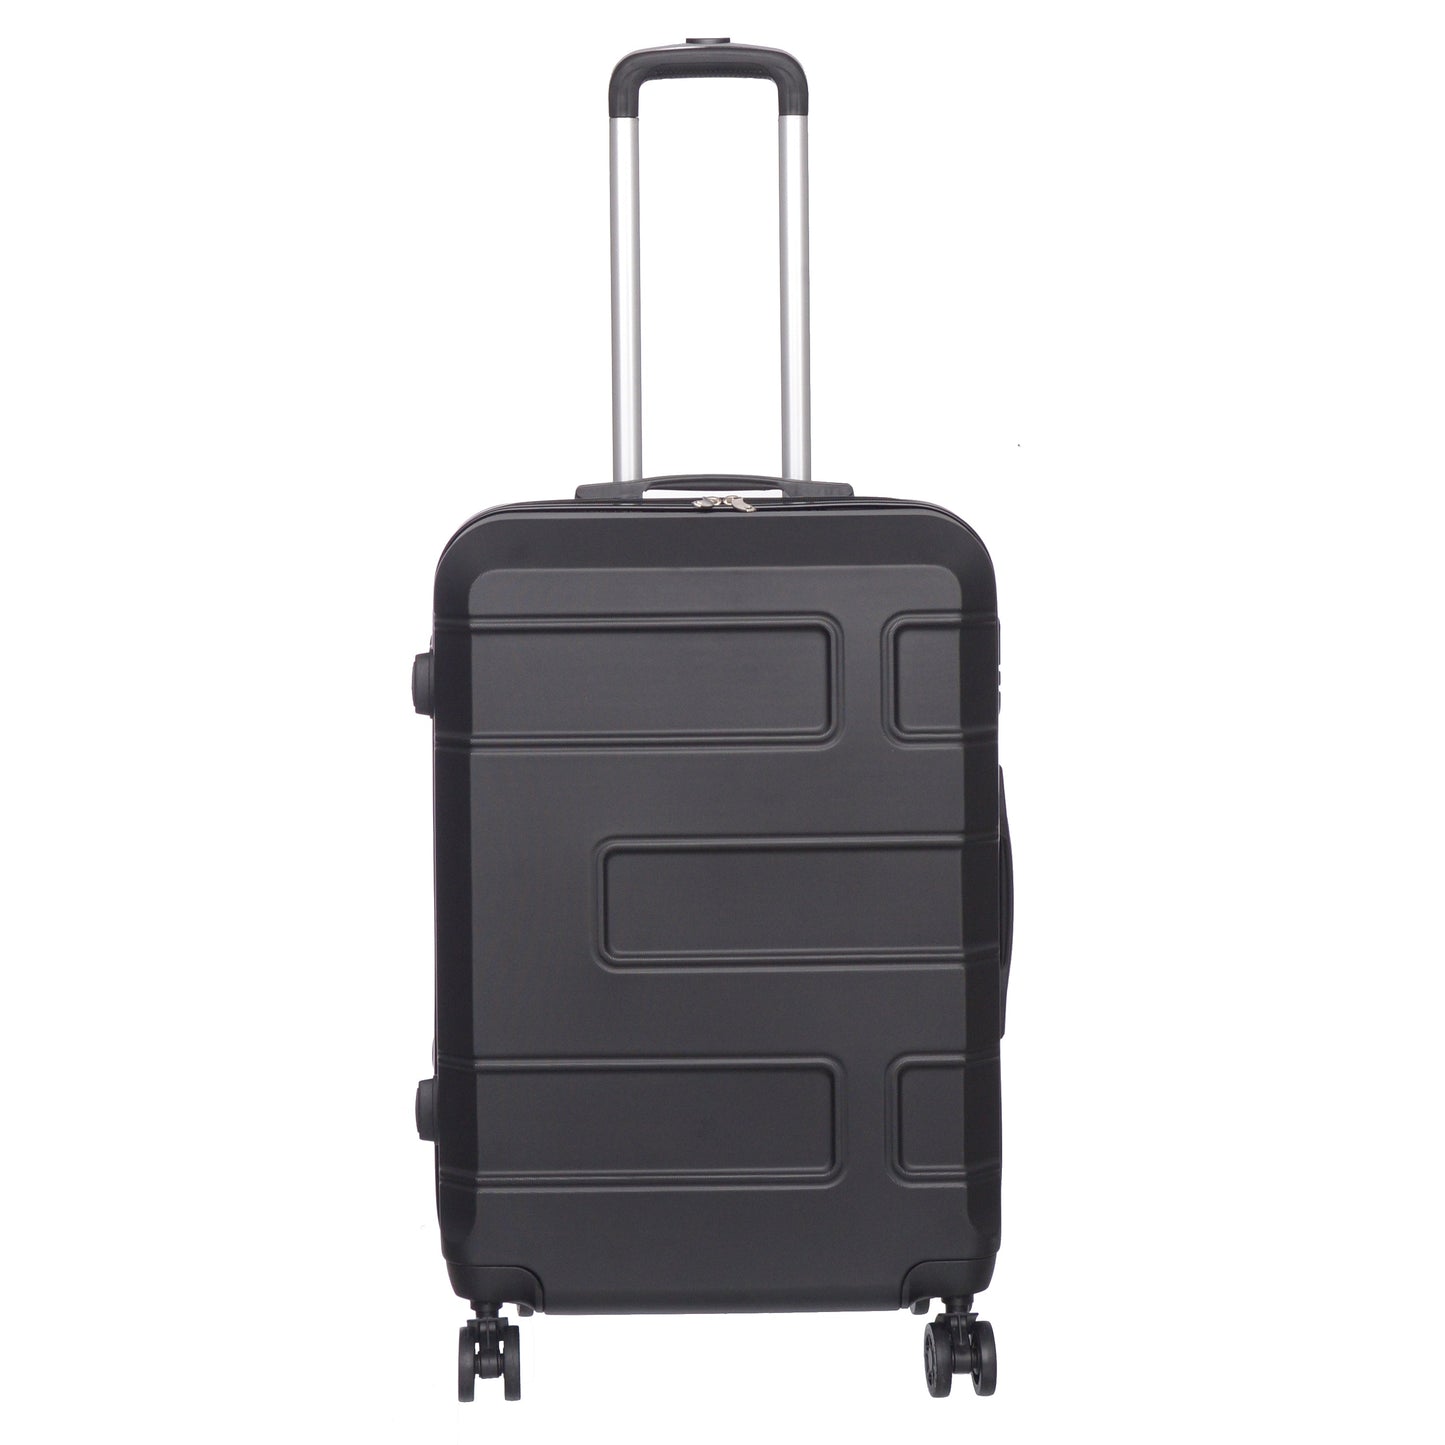 3 piece Luggage Set Deco Collection